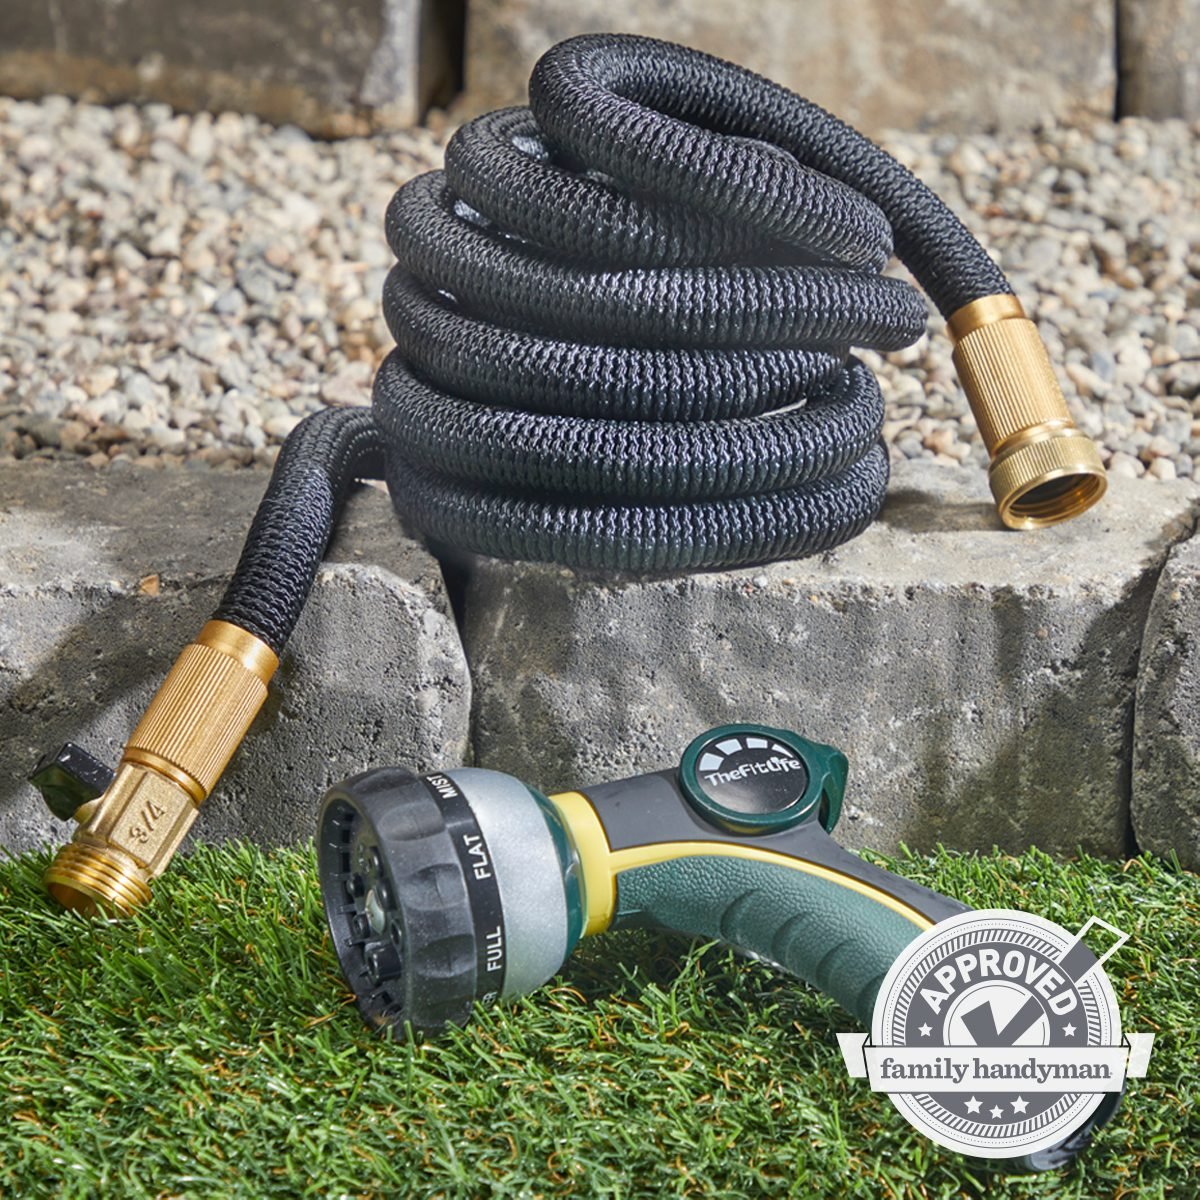 https://www.familyhandyman.com/wp-content/uploads/2022/05/FH22D_APPROVED_FITLIFE_EXPANDABLE_GARDEN_HOSE_05_09_001-Im-so-exicted-about-this-Family-Handyman-Approved-Garden-Hose-that-I-wet-my-plants.jpg?fit=700,700